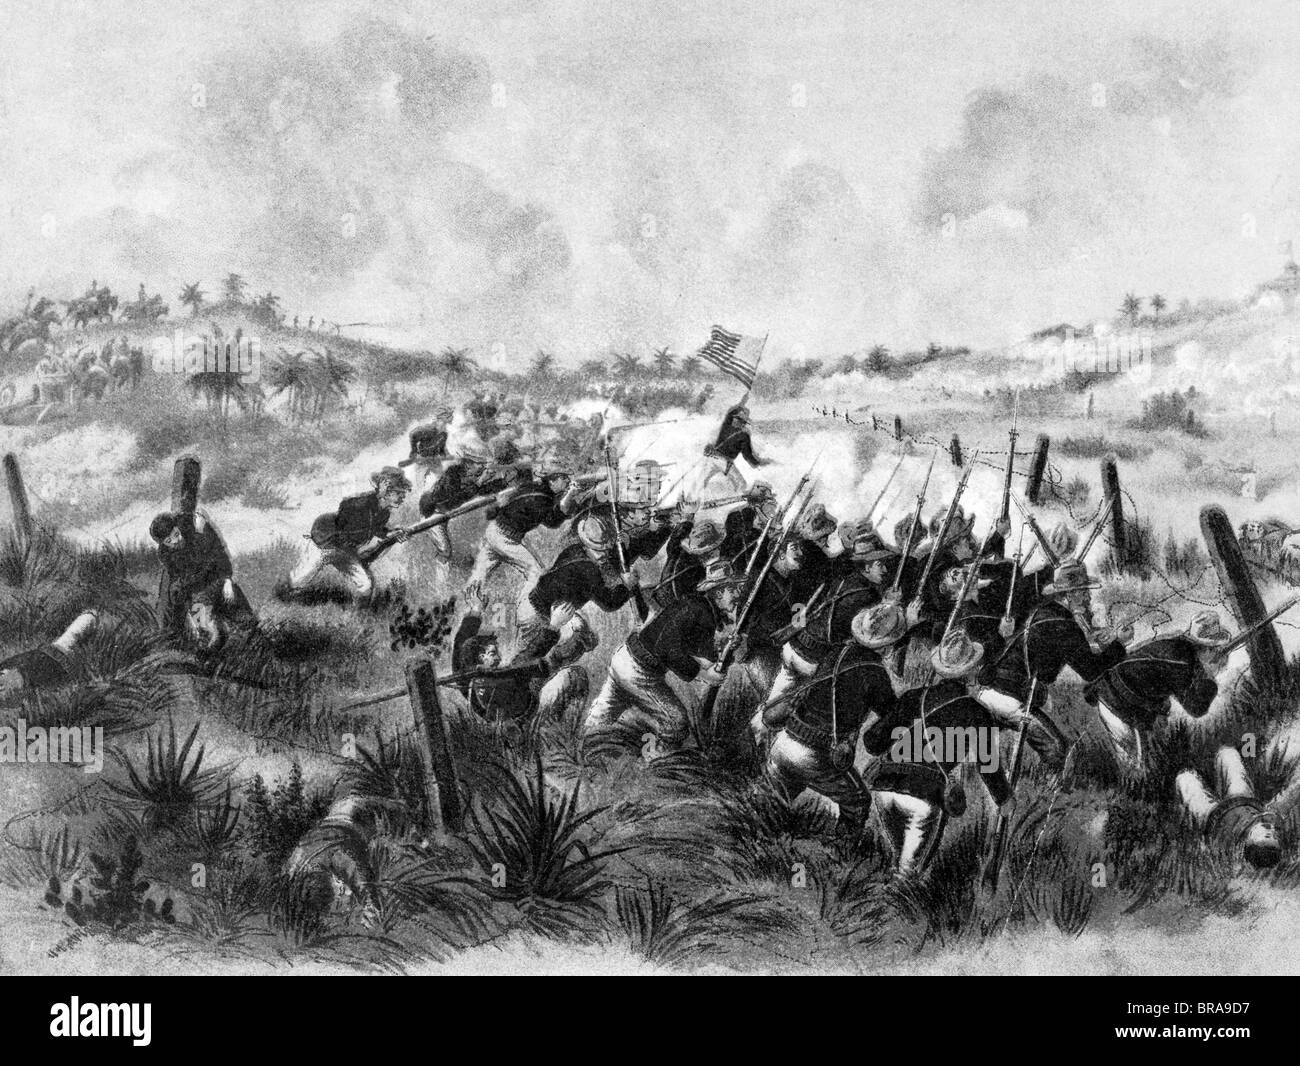 1800s 1890sILLUSTRATION CHARGE OF AMERICAN TROOPS UP SAN JUAN HILL JULY 1 1898 DURING SPANISH AMERICAN WAR Stock Photo